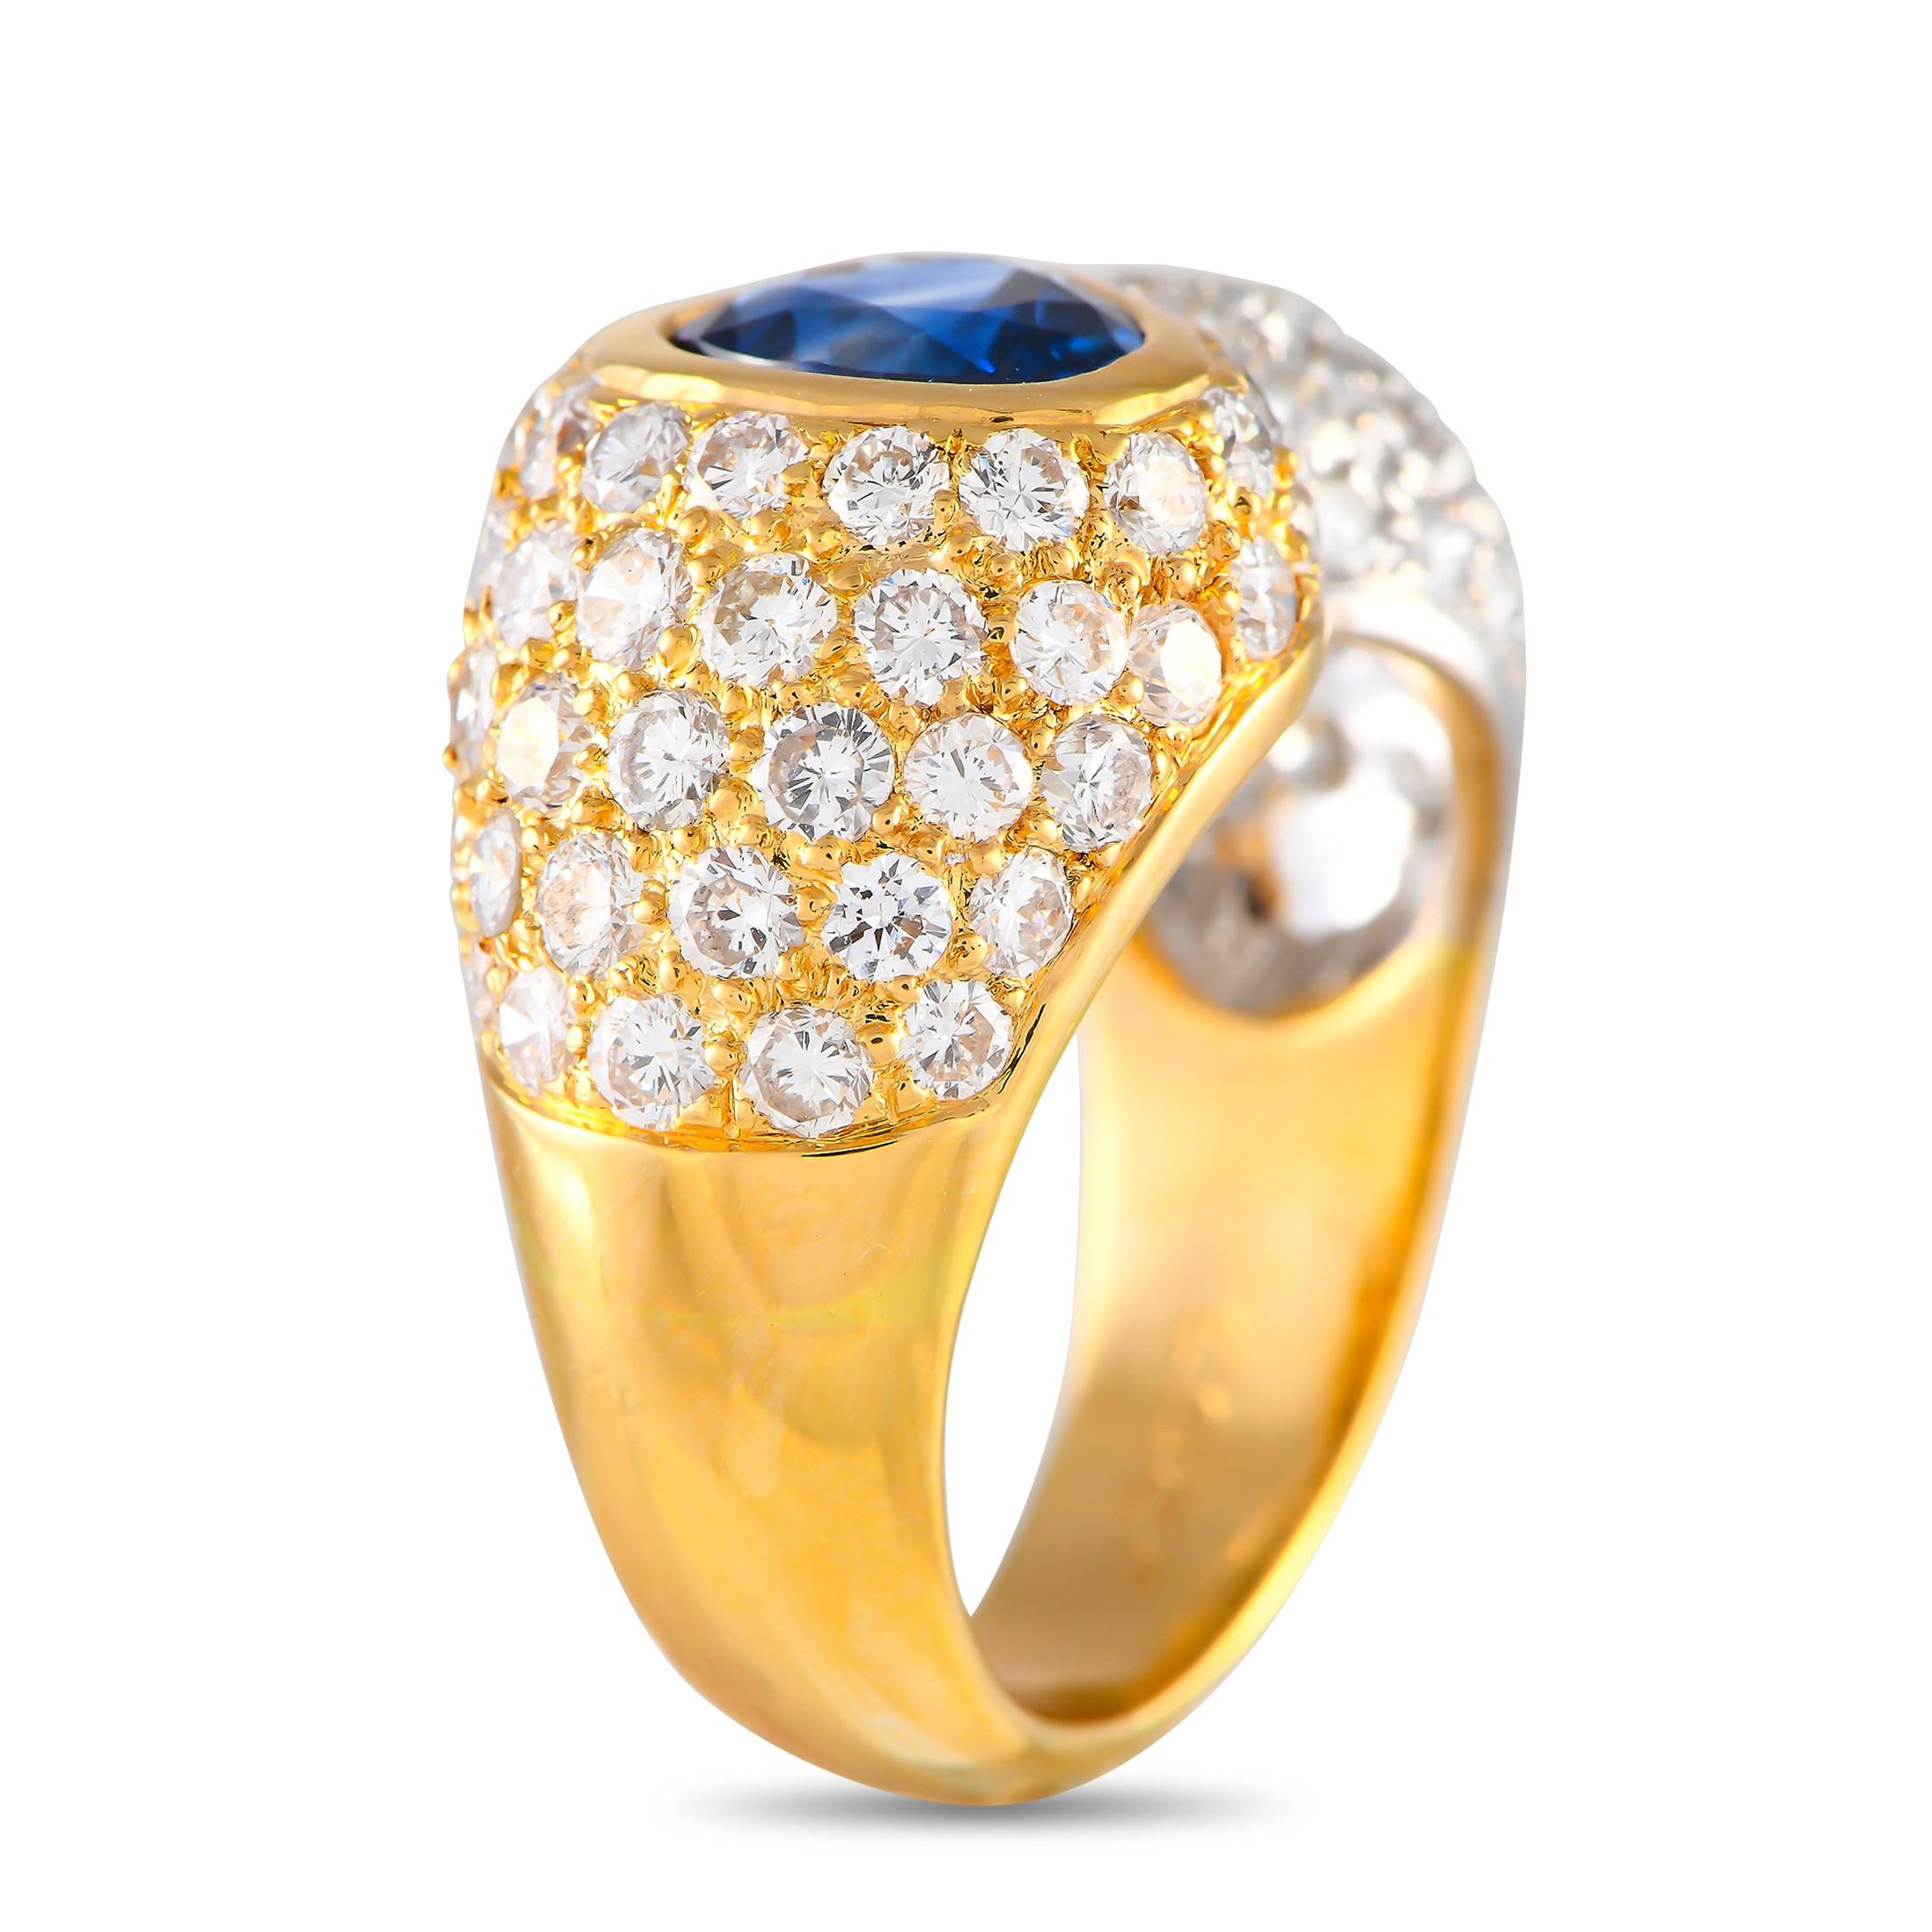 This opulent 18K Yellow Gold ring is nothing short of breathtaking. Inset Diamonds with a total weight of 2.53 carats allow it to effortlessly catch the light  but its the 1.73 carat GIA Certified heated Sapphire center stone that makes it simply